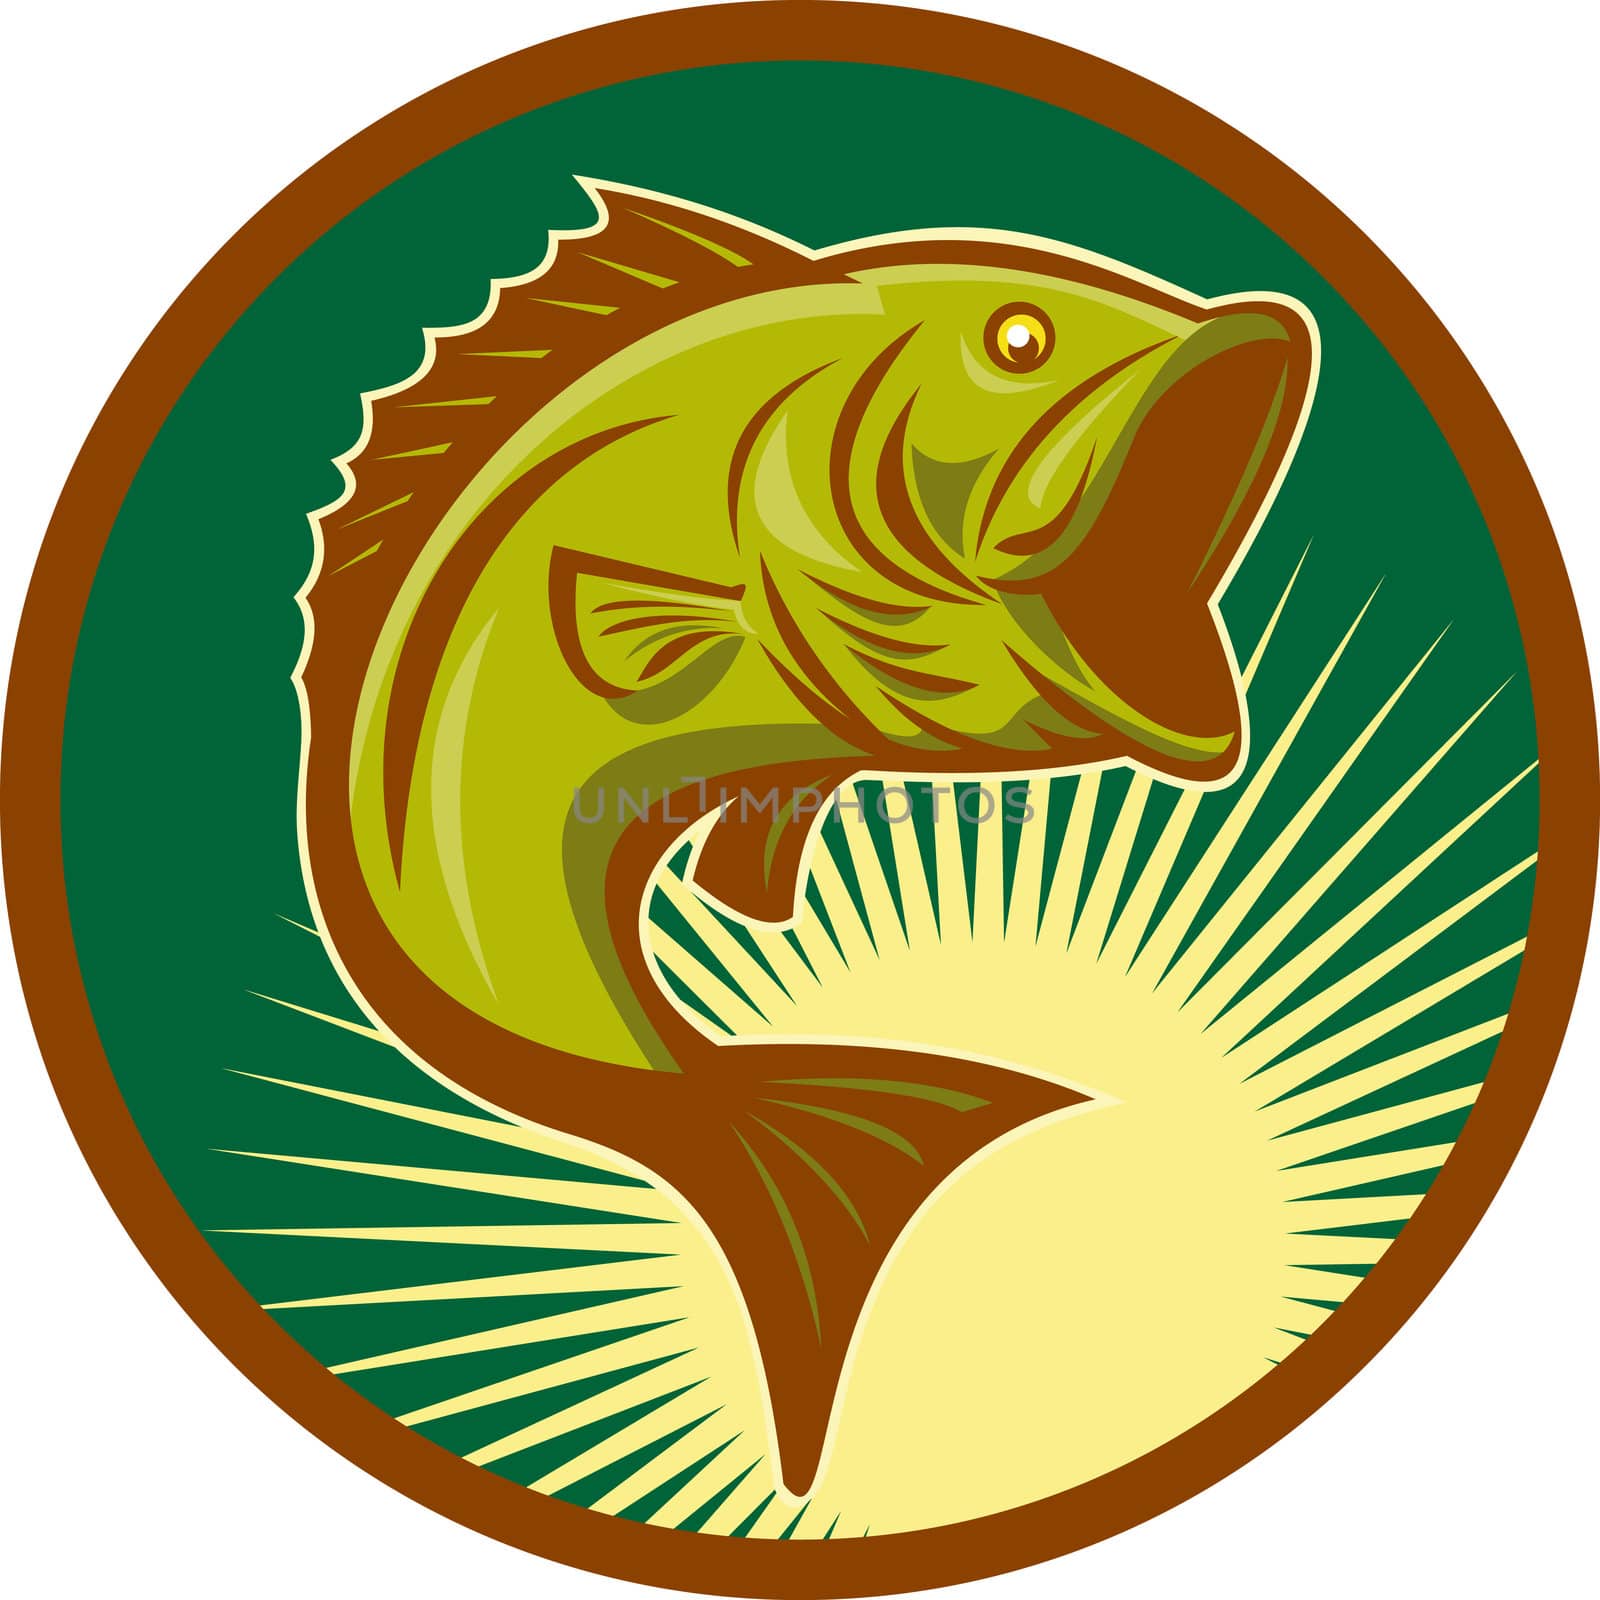 illustration of a largemouth bass fish jumping set inside circle with forest green background done in retro style